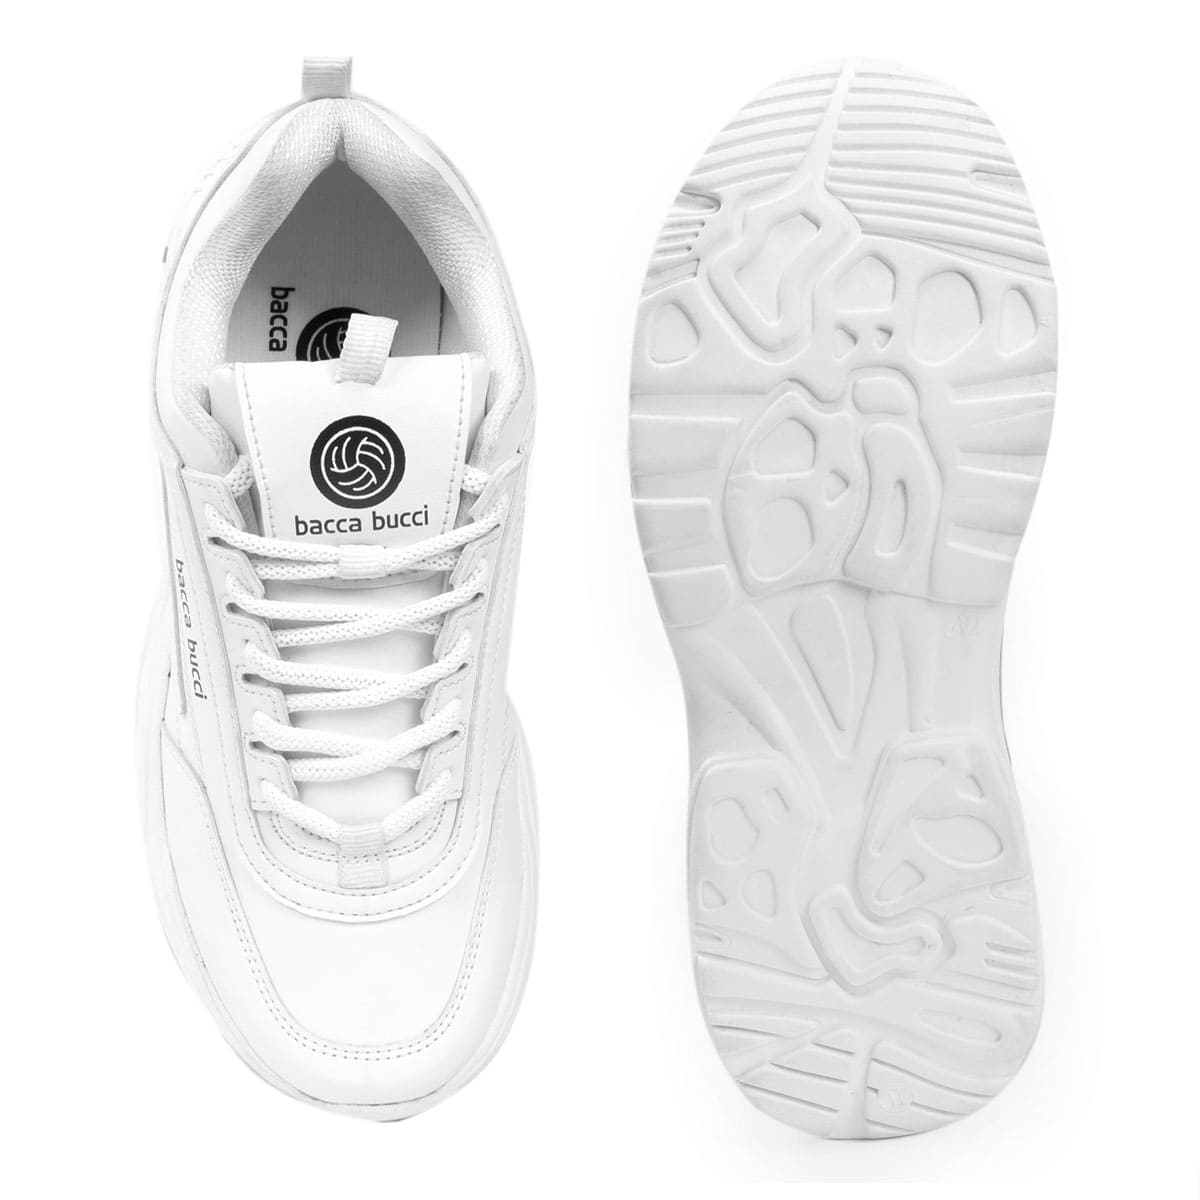 white sports shoes for men